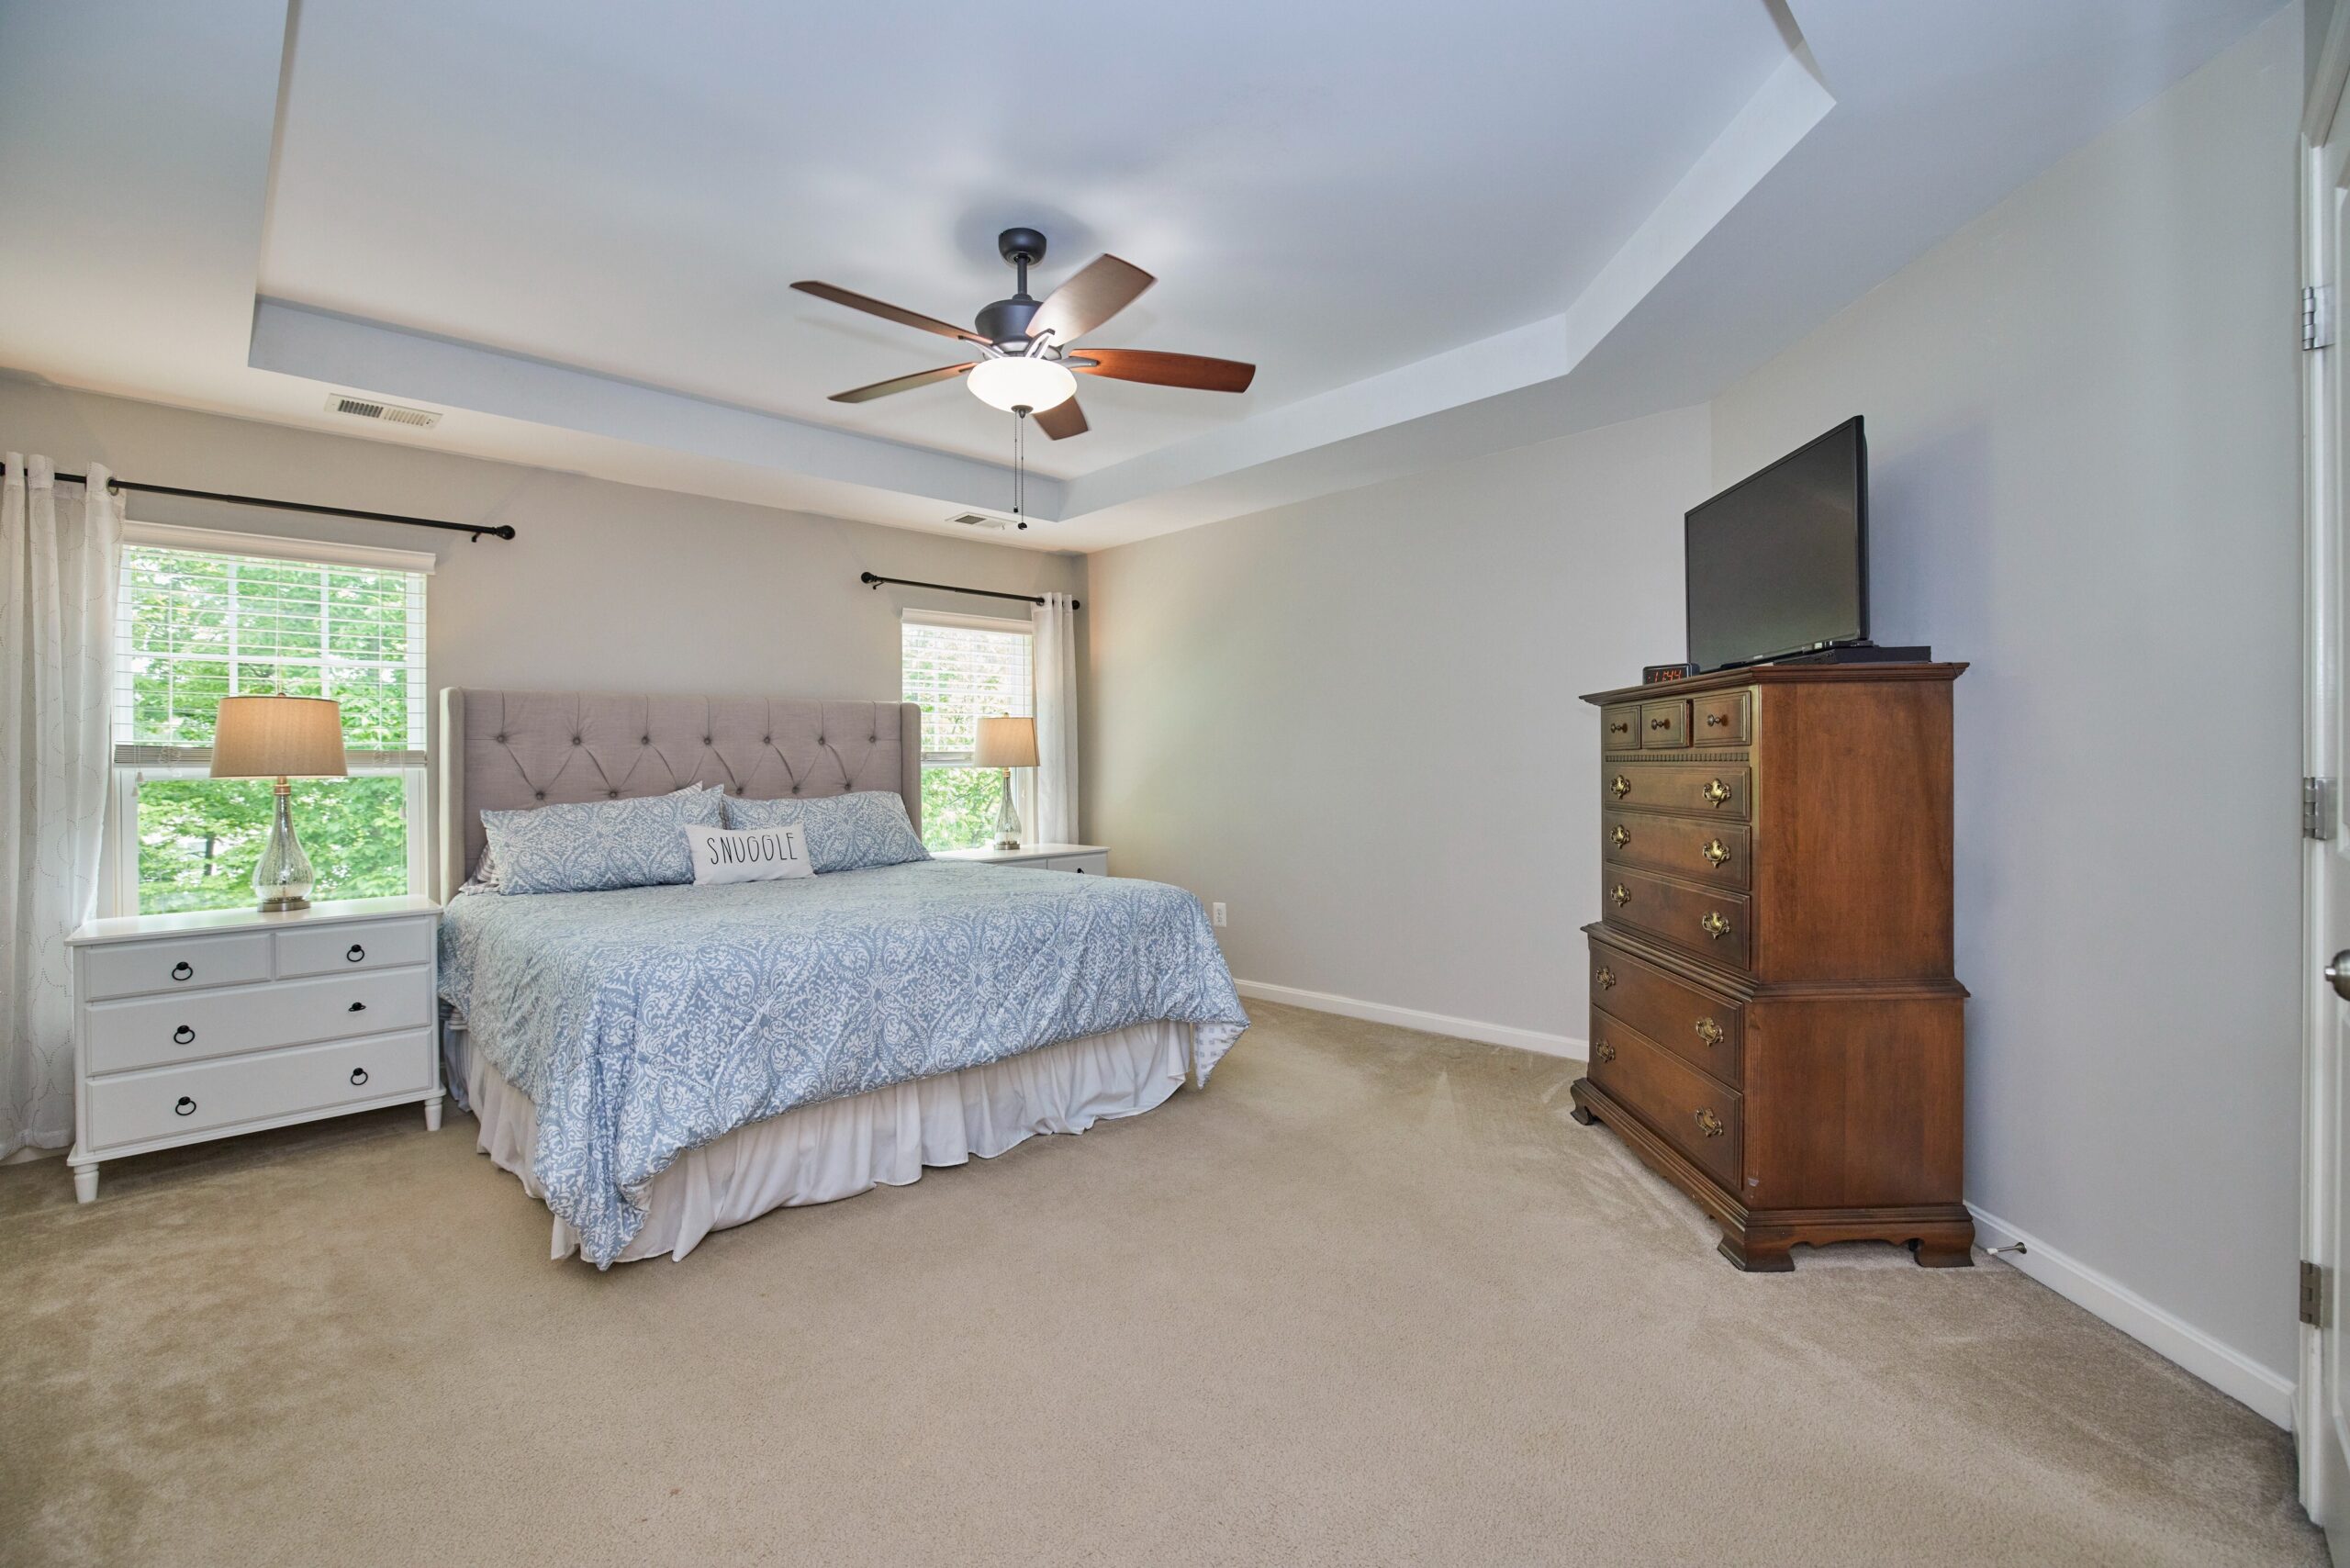 Professional interior photo of 12030 Lake Dorian Drive, Bristow, VA - showing the primary bedroom with trey ceiling and king size bed flanked by windows